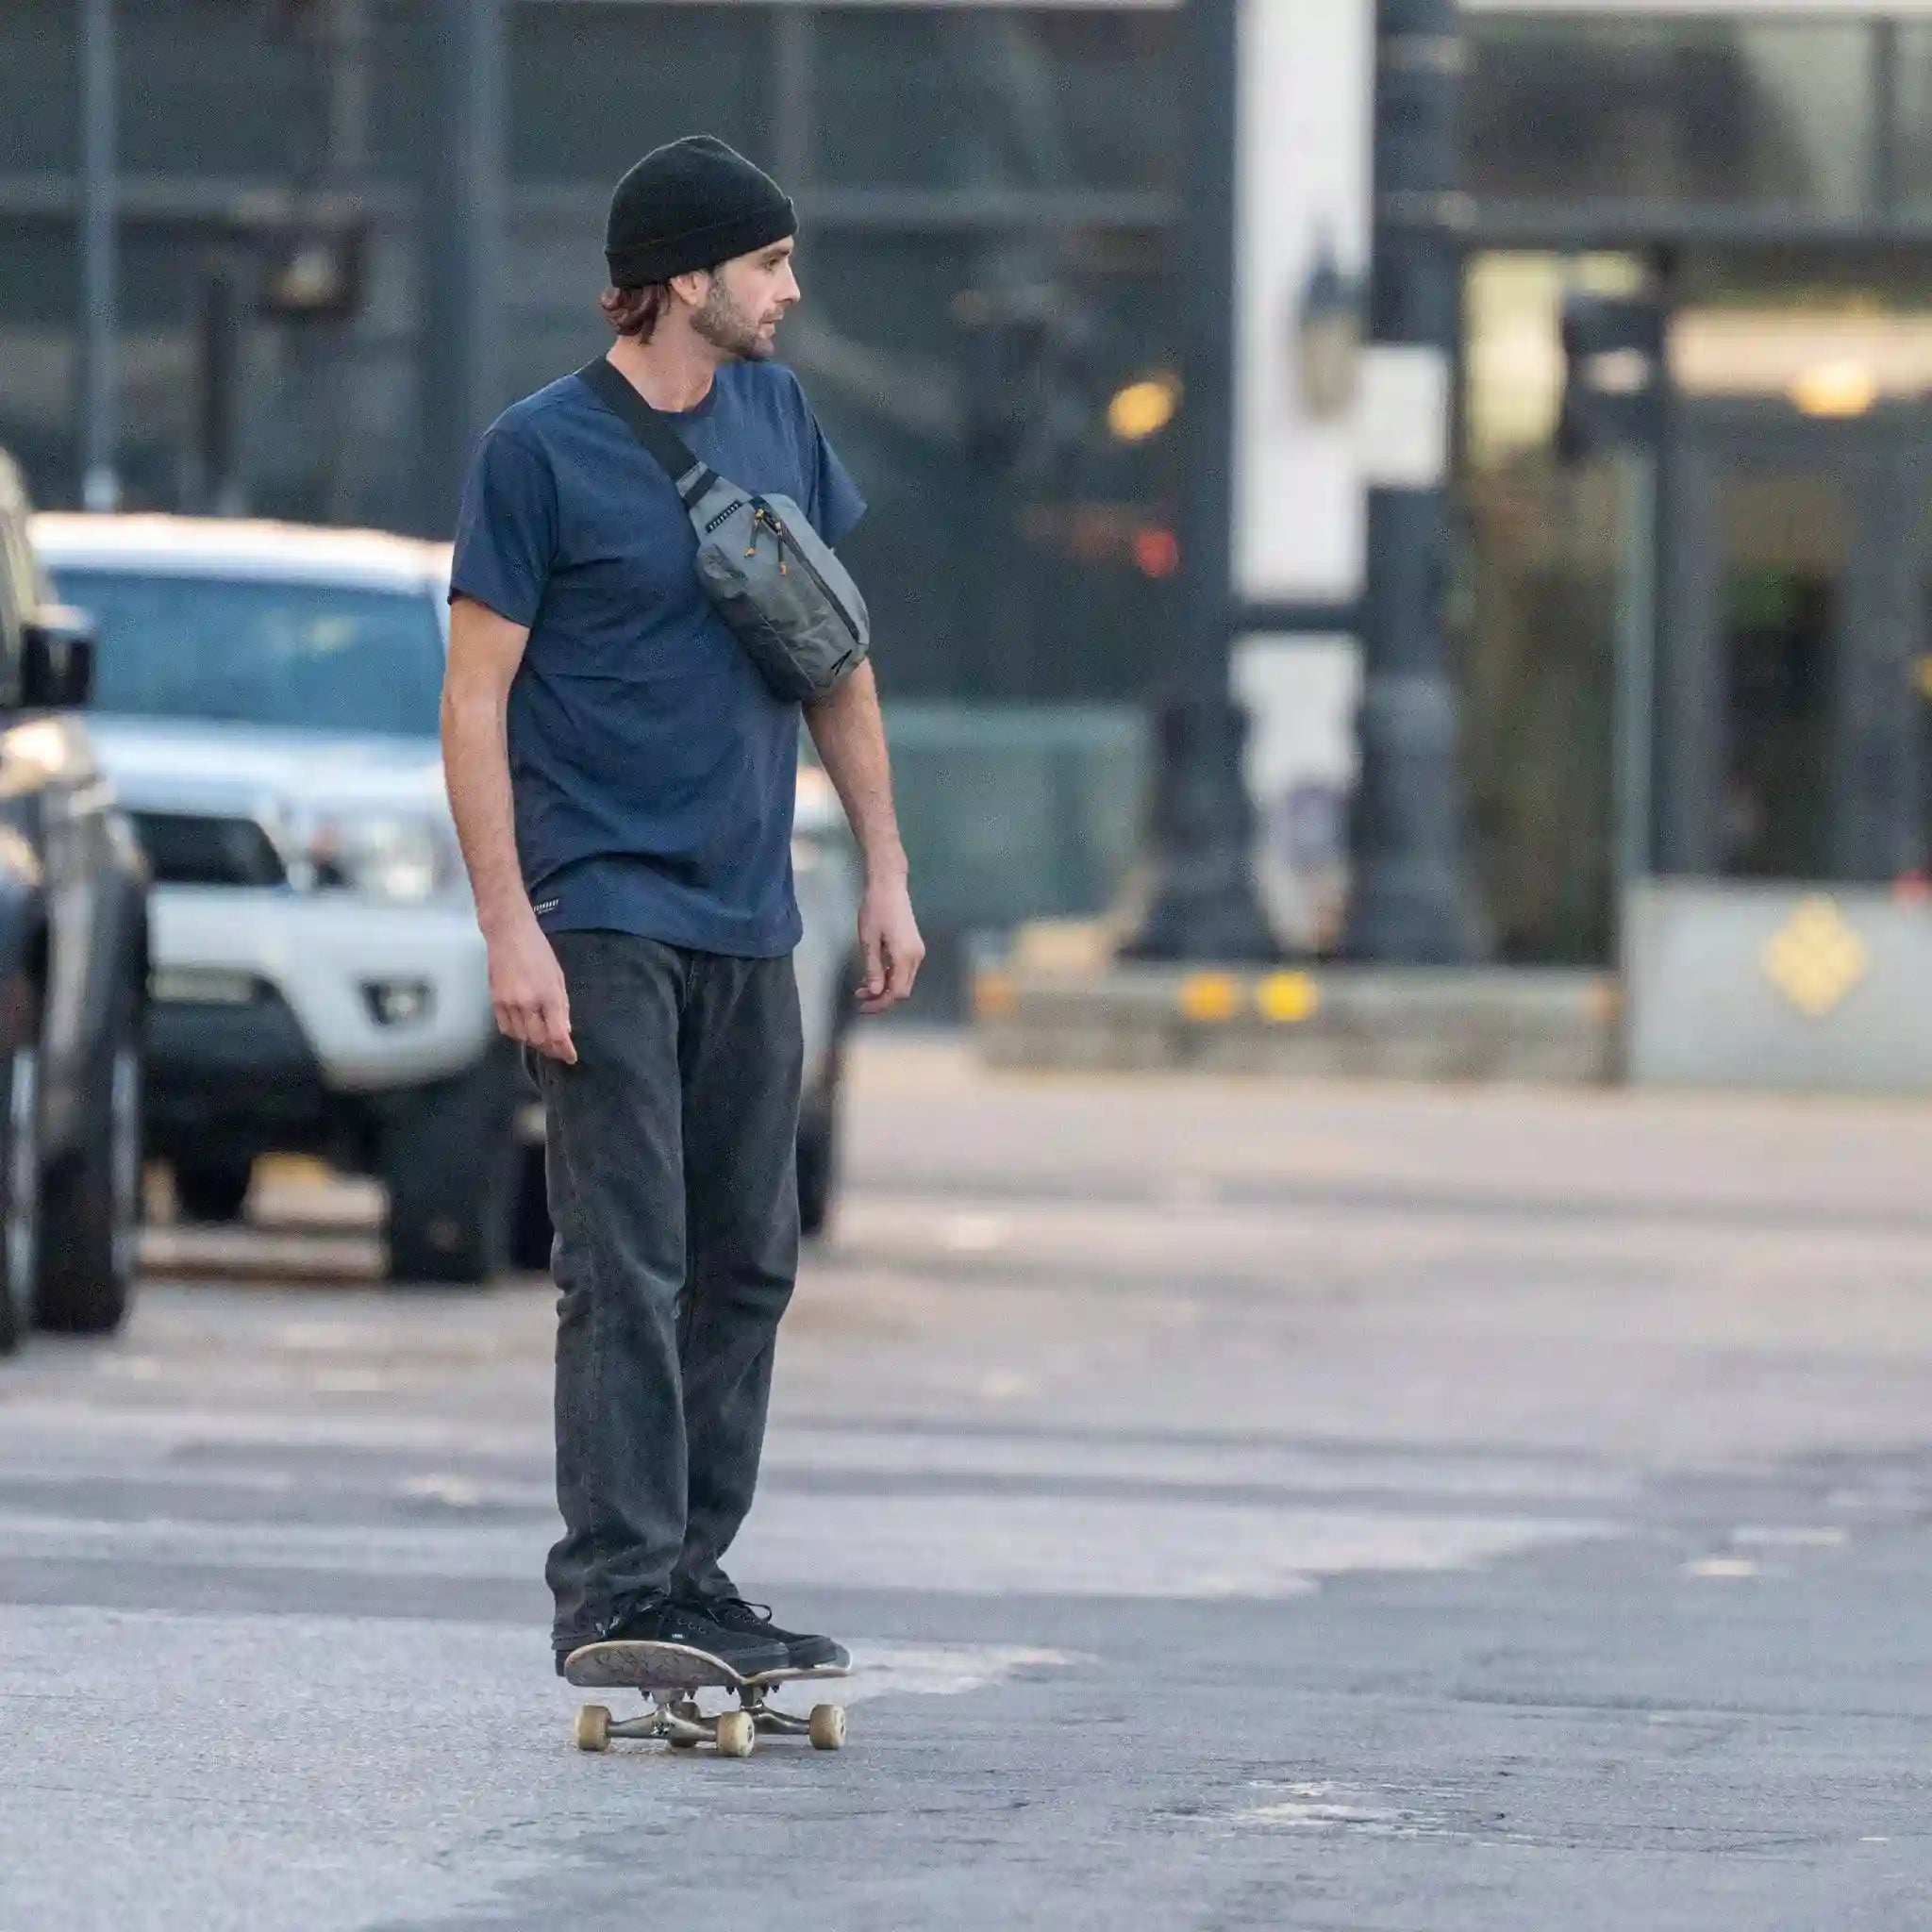 A man rides his skateboard through the city with his Rennen X-Pac Crossbody.